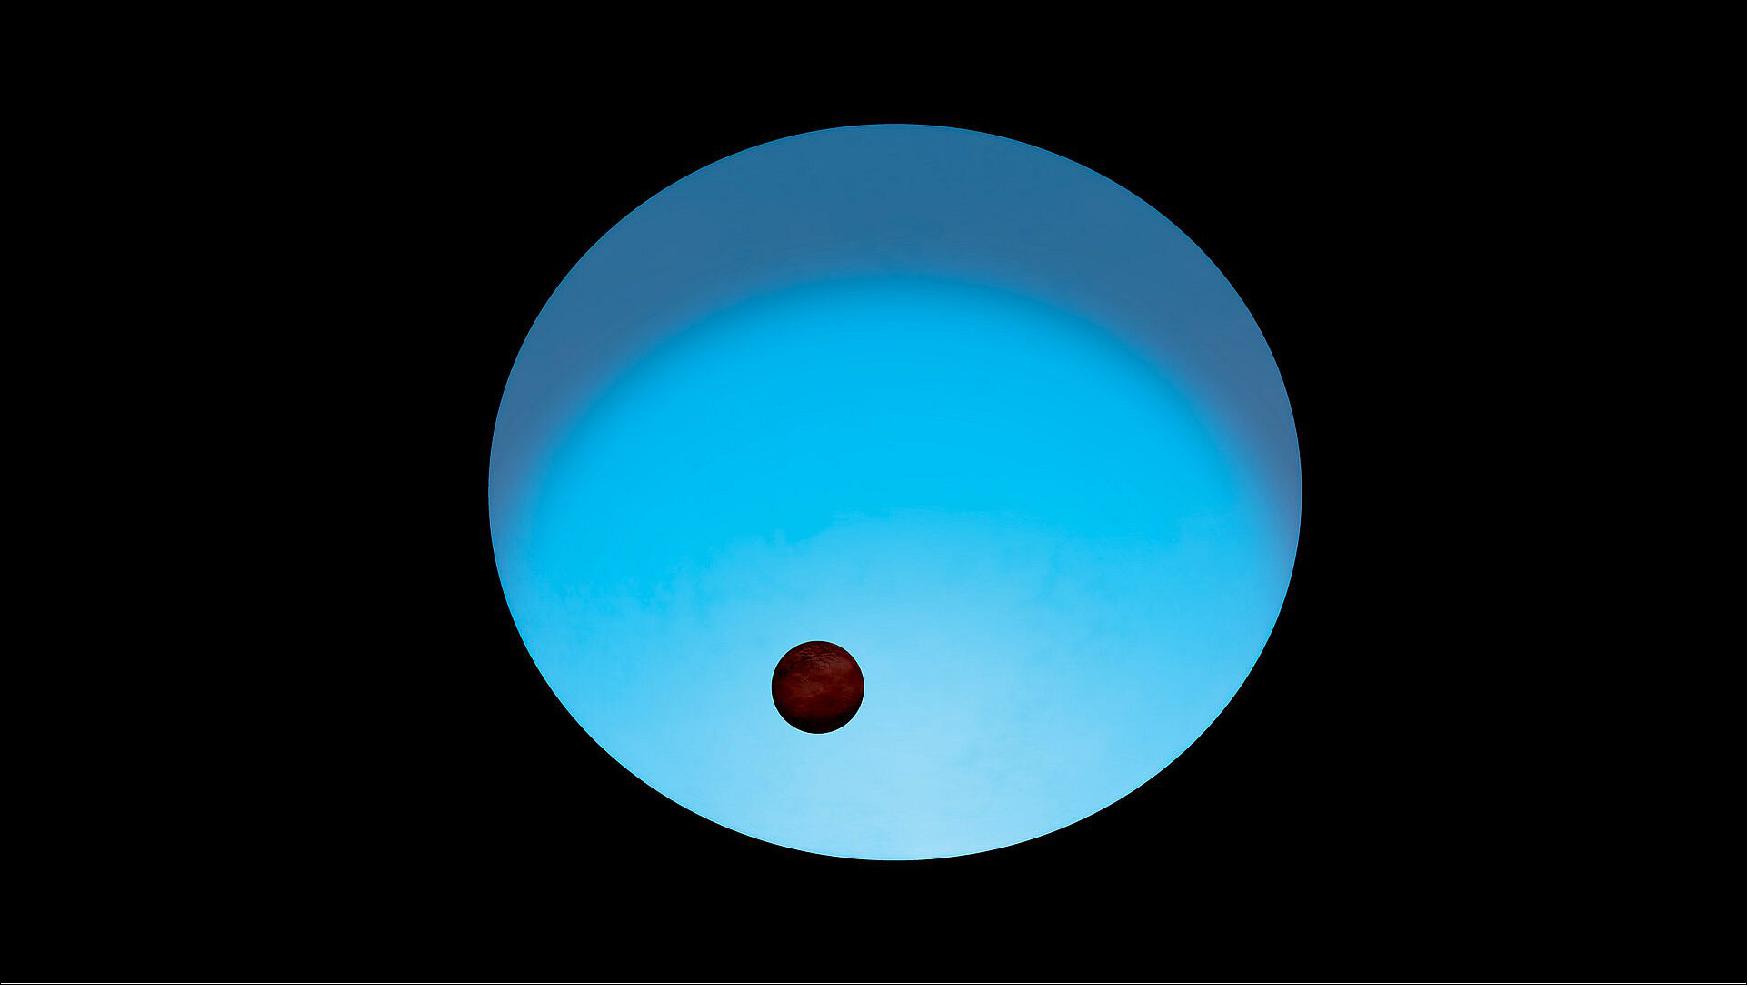 Figure 24: Artist impression of exoplanet WASP-189b orbiting its host star. The system was observed by ESA’s exoplanet mission Cheops to determine key characteristics. For example, the host star is larger and more than 2000 degrees hotter than our own Sun, and so appears to glow blue. The planet has an inclined orbit – it doesn’t travel around the equator, but passes close to the star’s poles. It is one of the hottest and most extreme extra-solar planets known to date, and falls into the class of ultra-hot Jupiters (image credit: ESA)